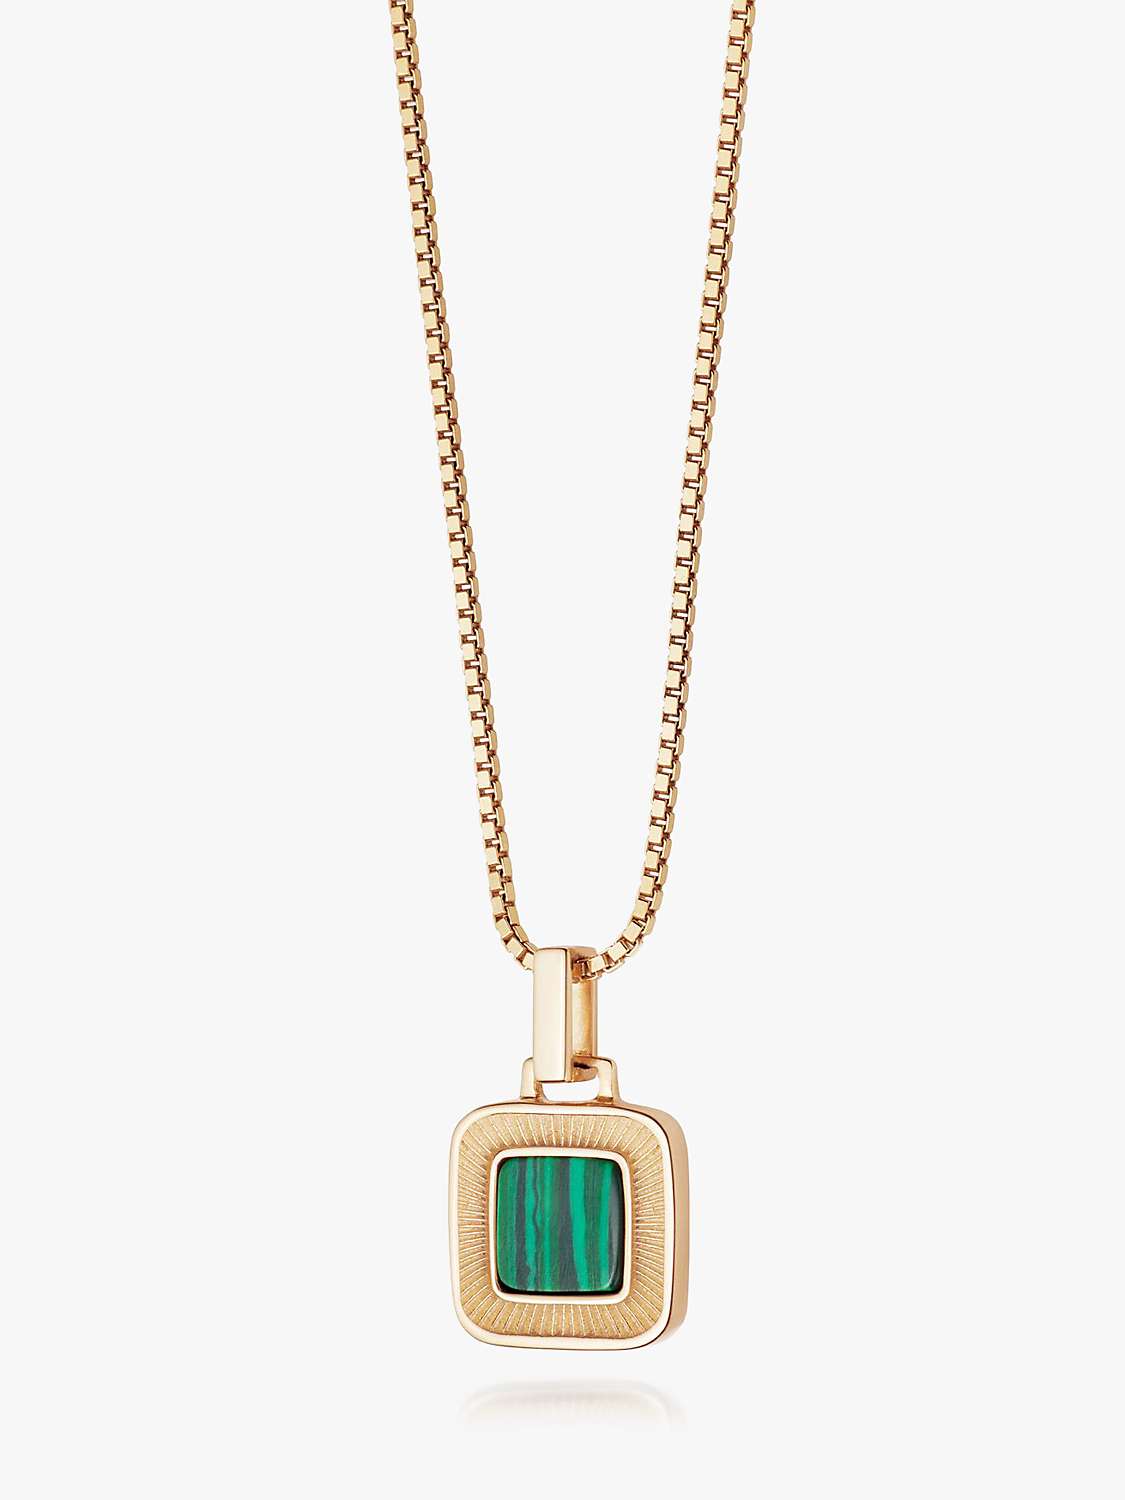 Buy Daisy London Malachite Square Pendant Necklace, Gold/Green Online at johnlewis.com